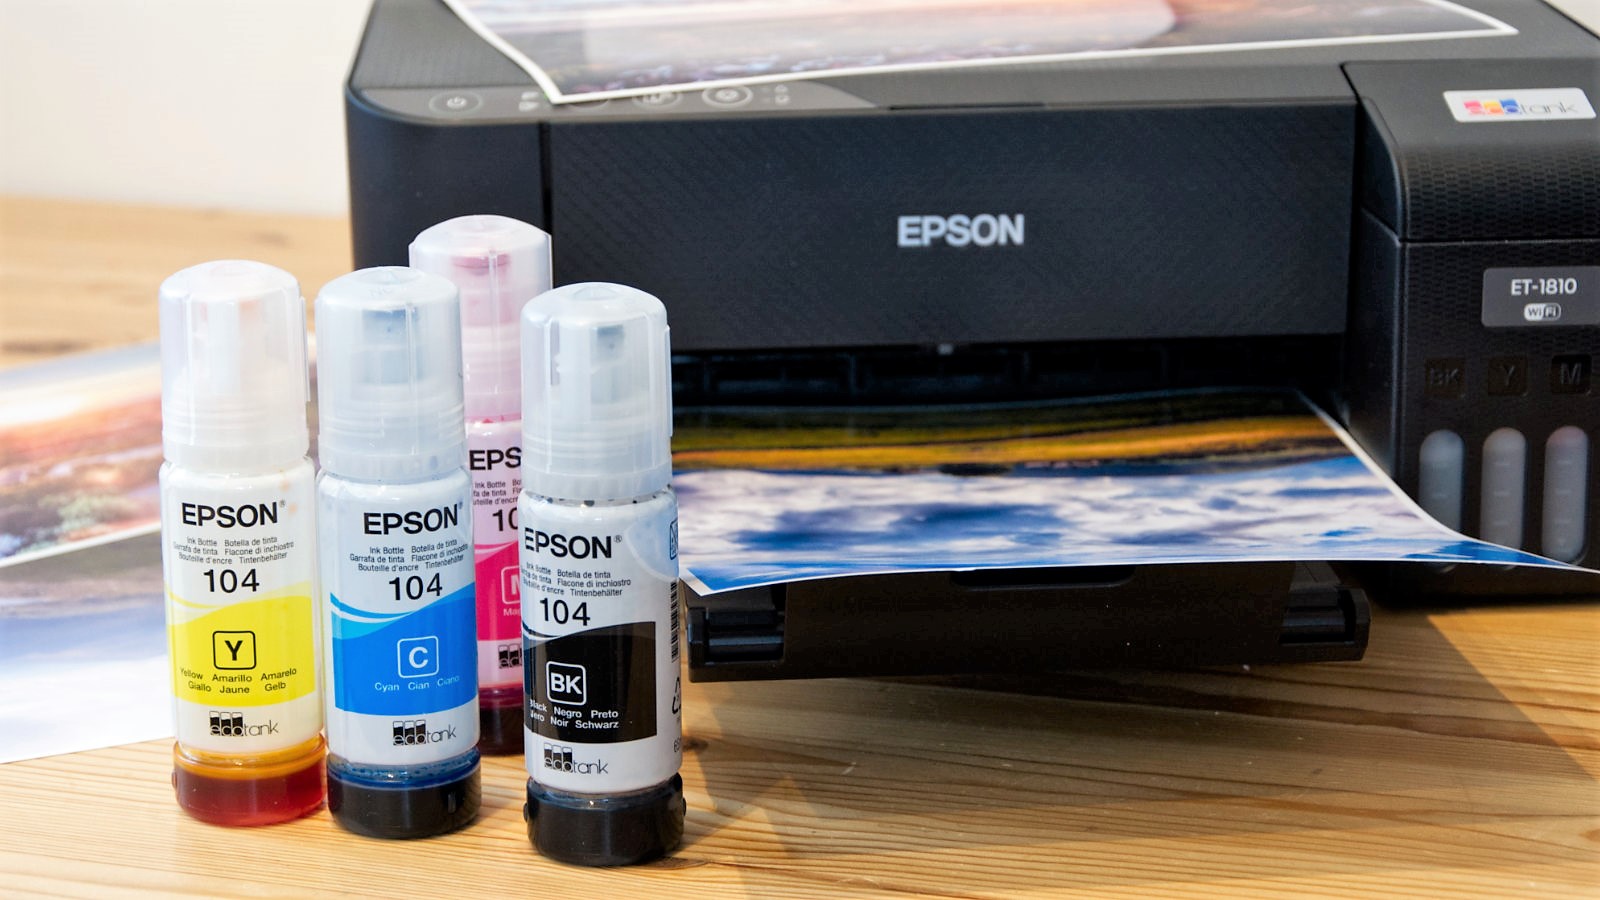 Epson ET-1801 and inks